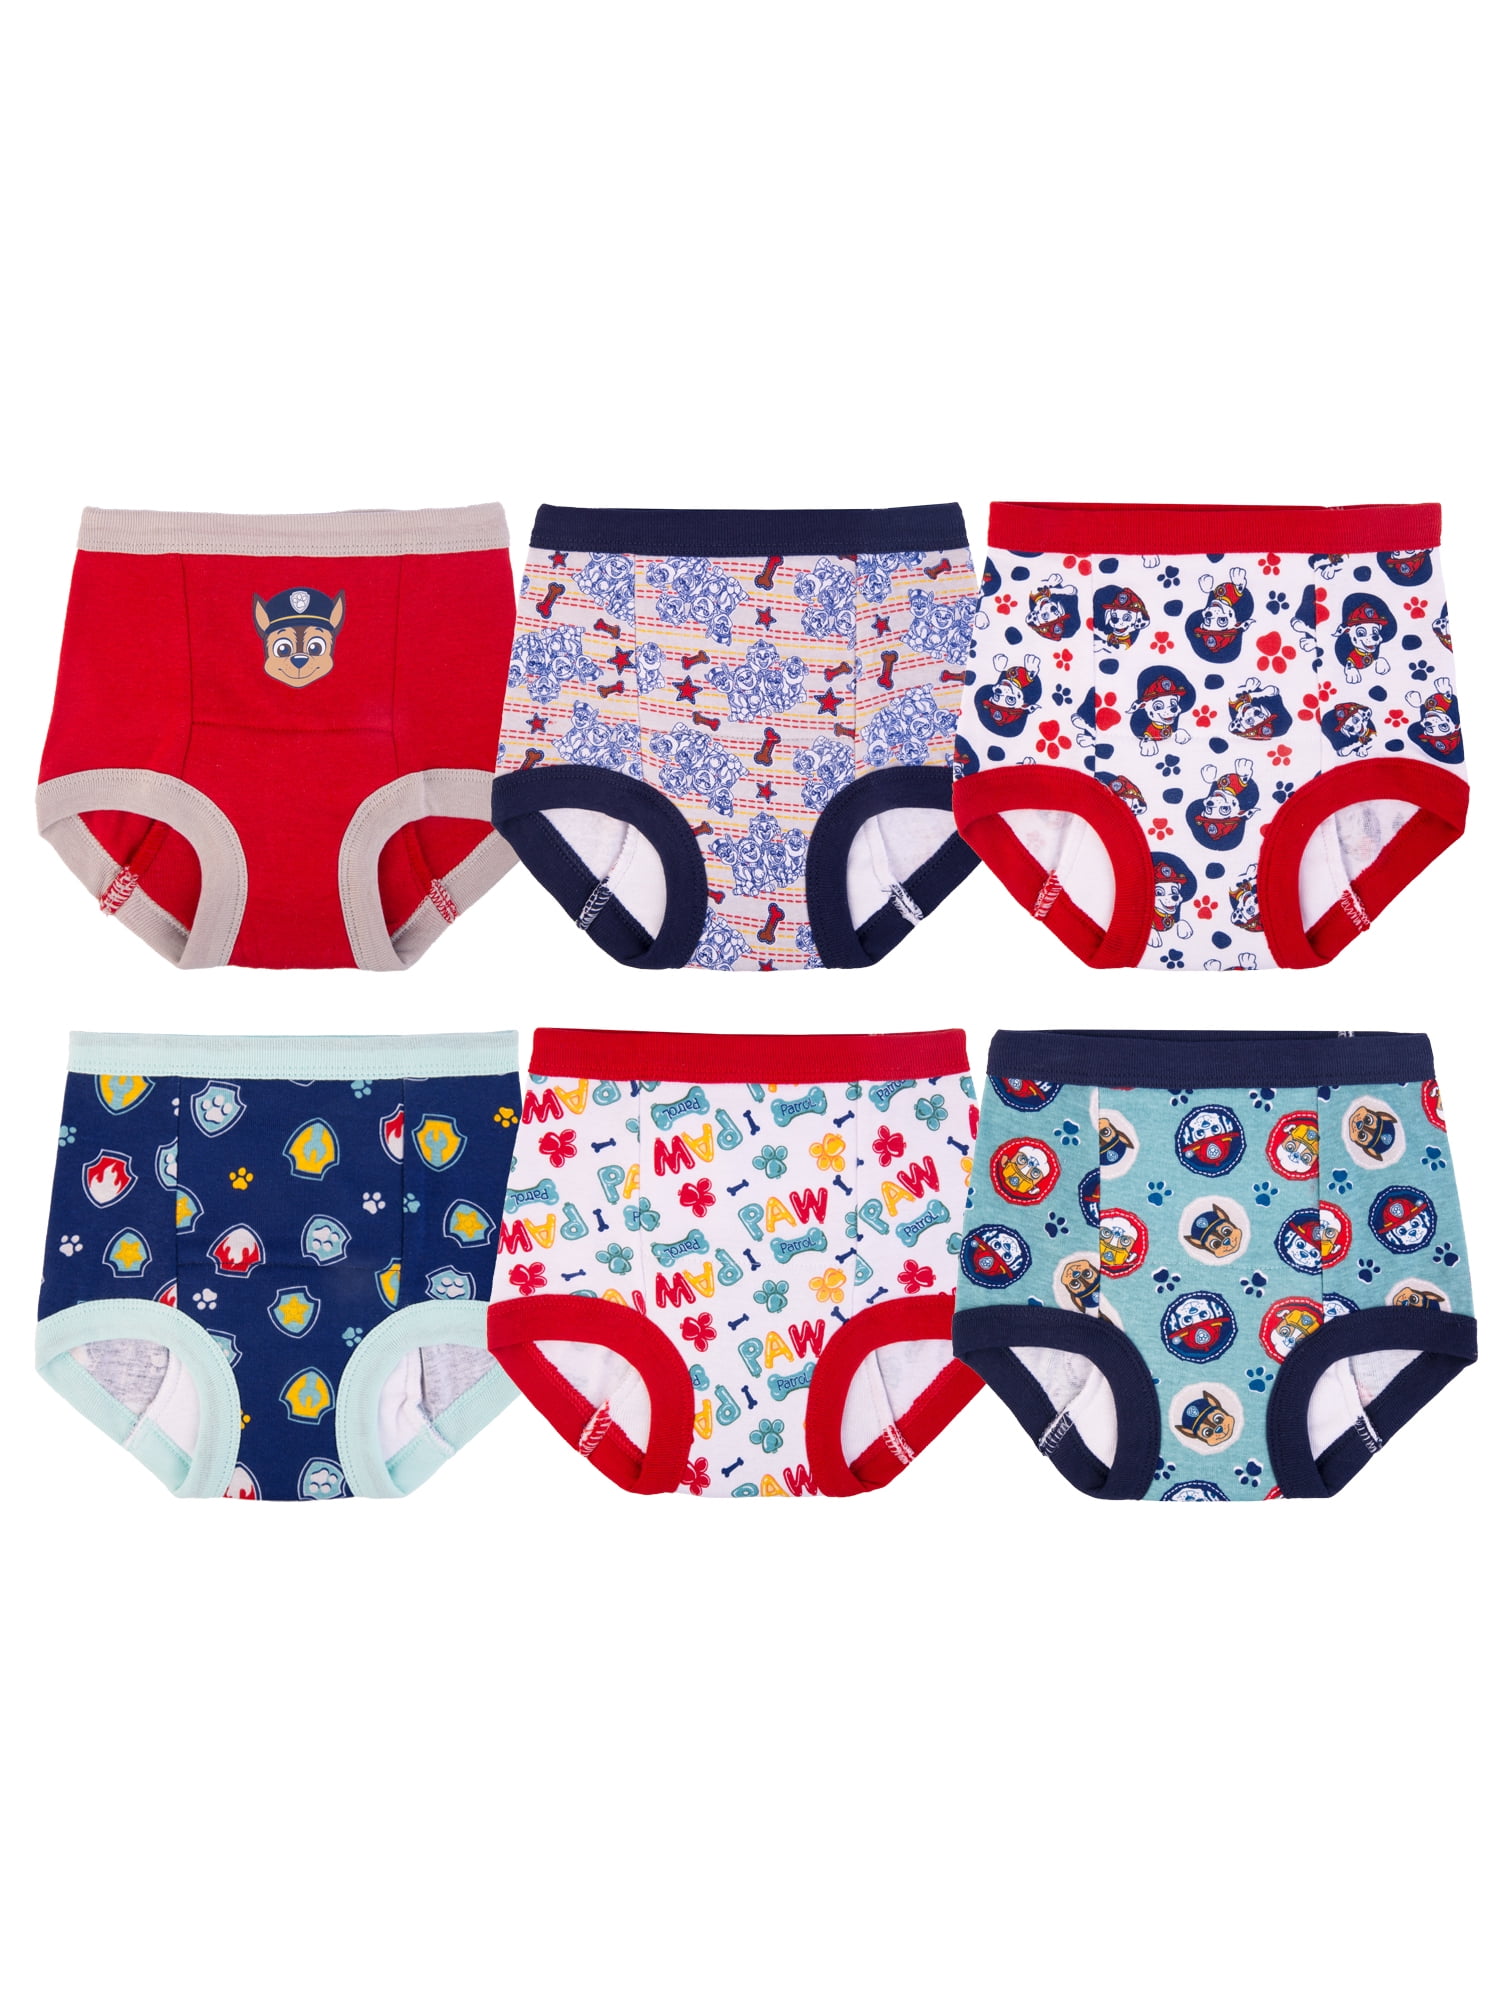 Paw Patrol Toddler Size 2T/3T Blue, Navy & White Briefs With